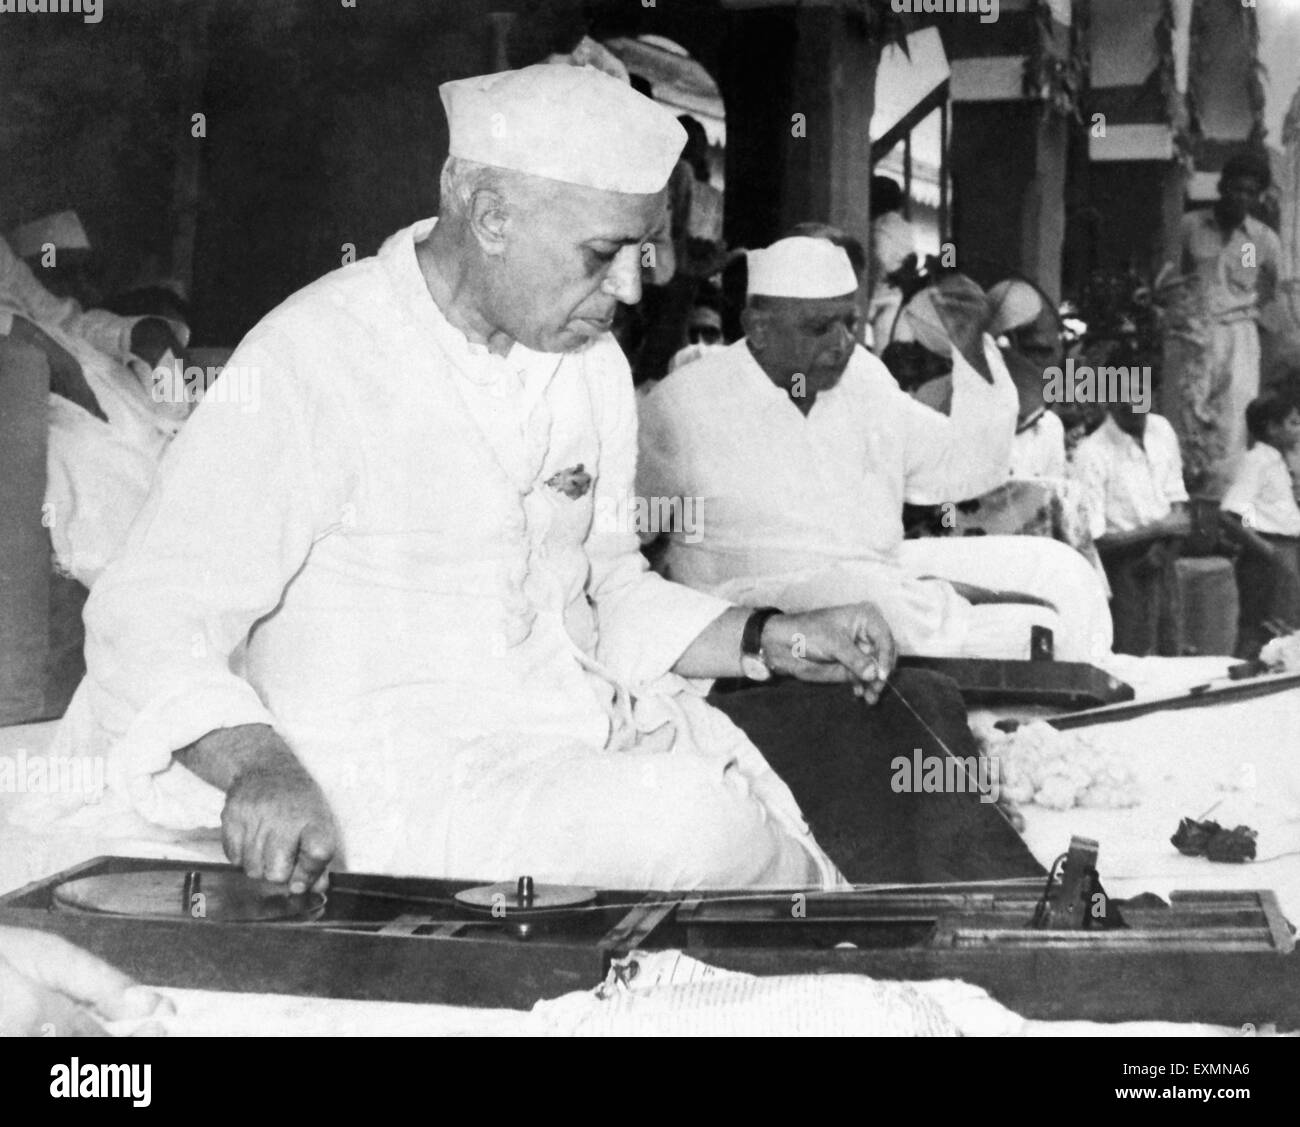 Jawaharlal Nehru spinning ; 1945 ; India, Asia, old vintage 1900s picture Stock Photo